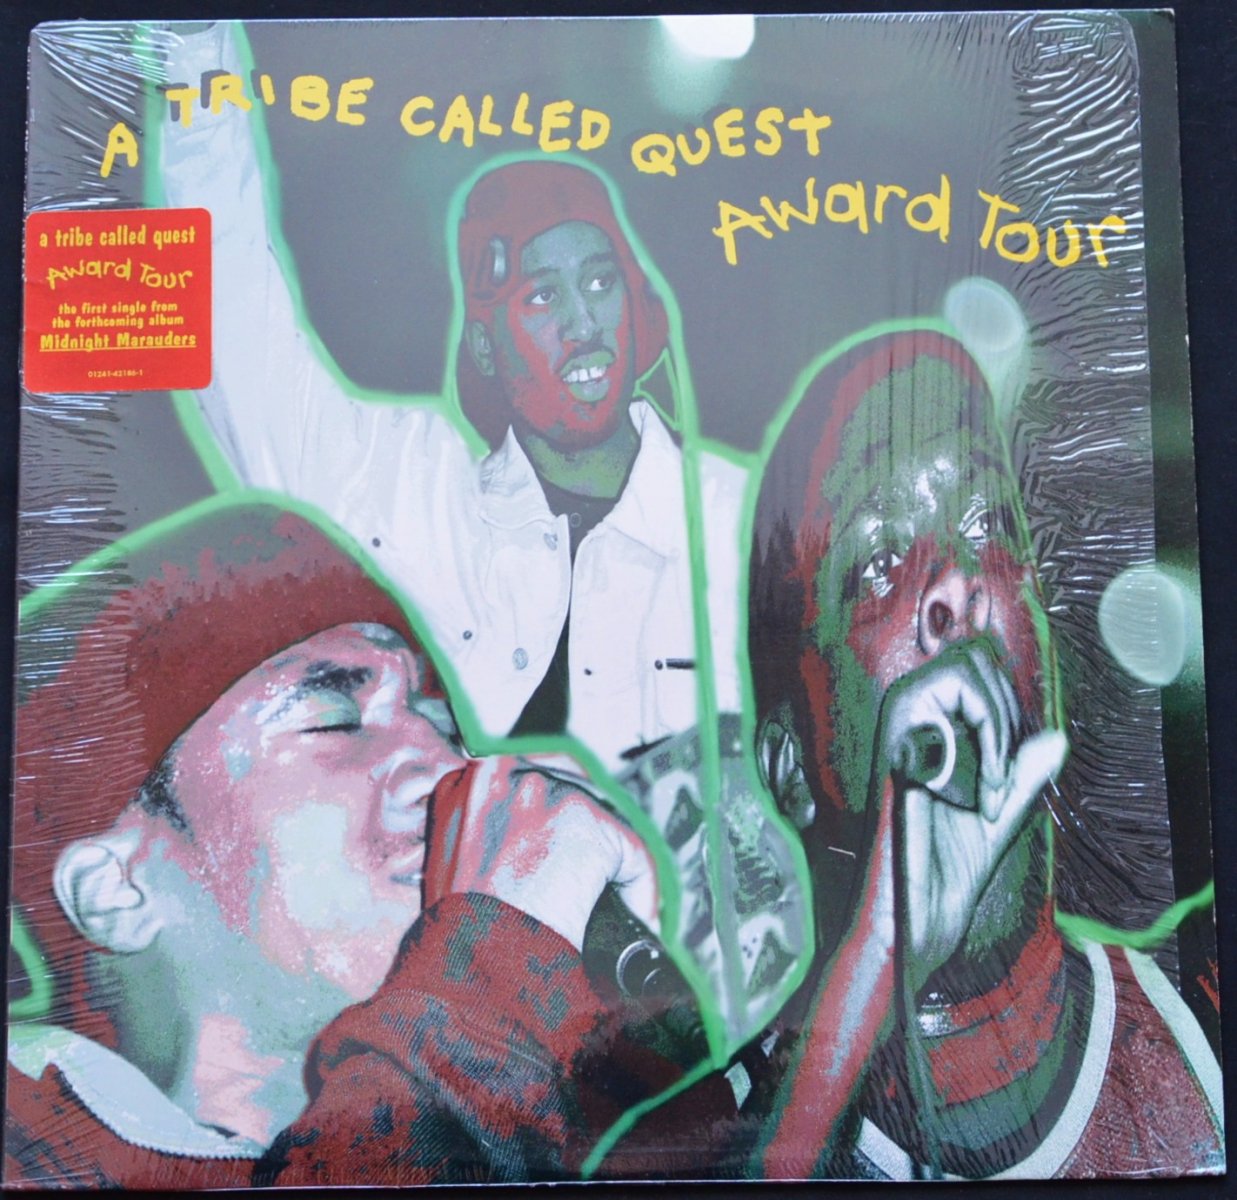 A TRIBE CALLED QUEST ‎/ AWARD TOUR / THE CHASE, PART II (12